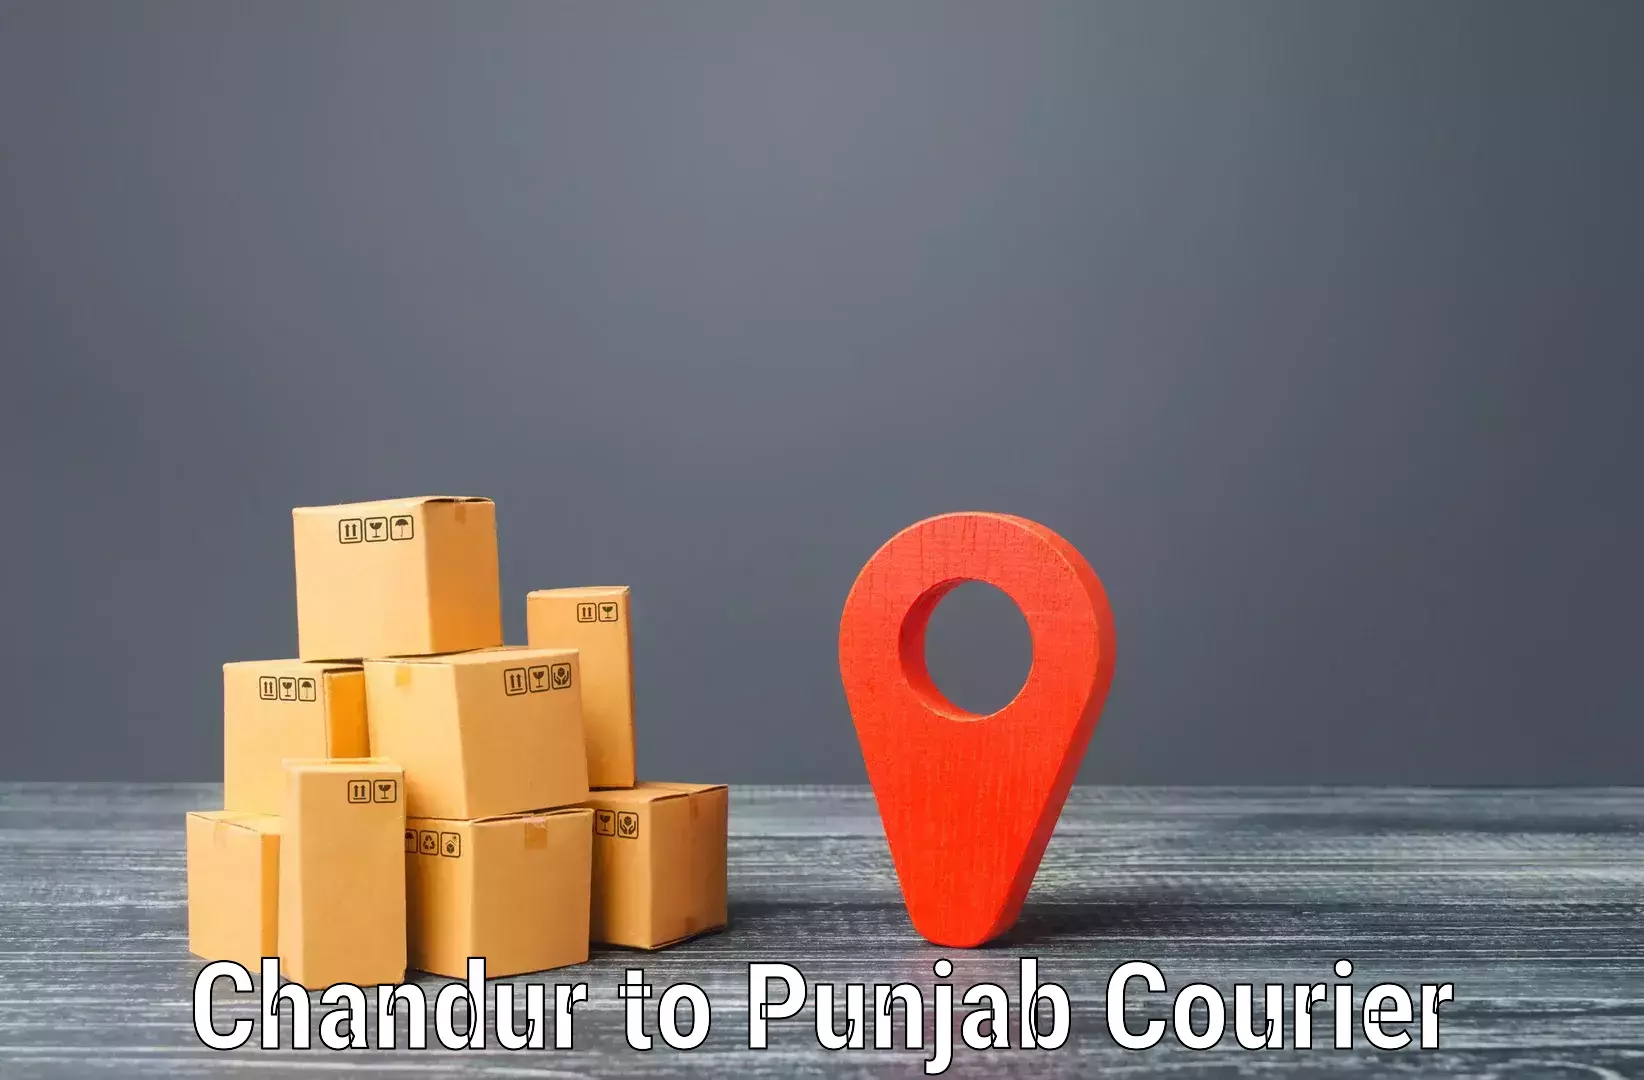 Air courier services in Chandur to Jalandhar